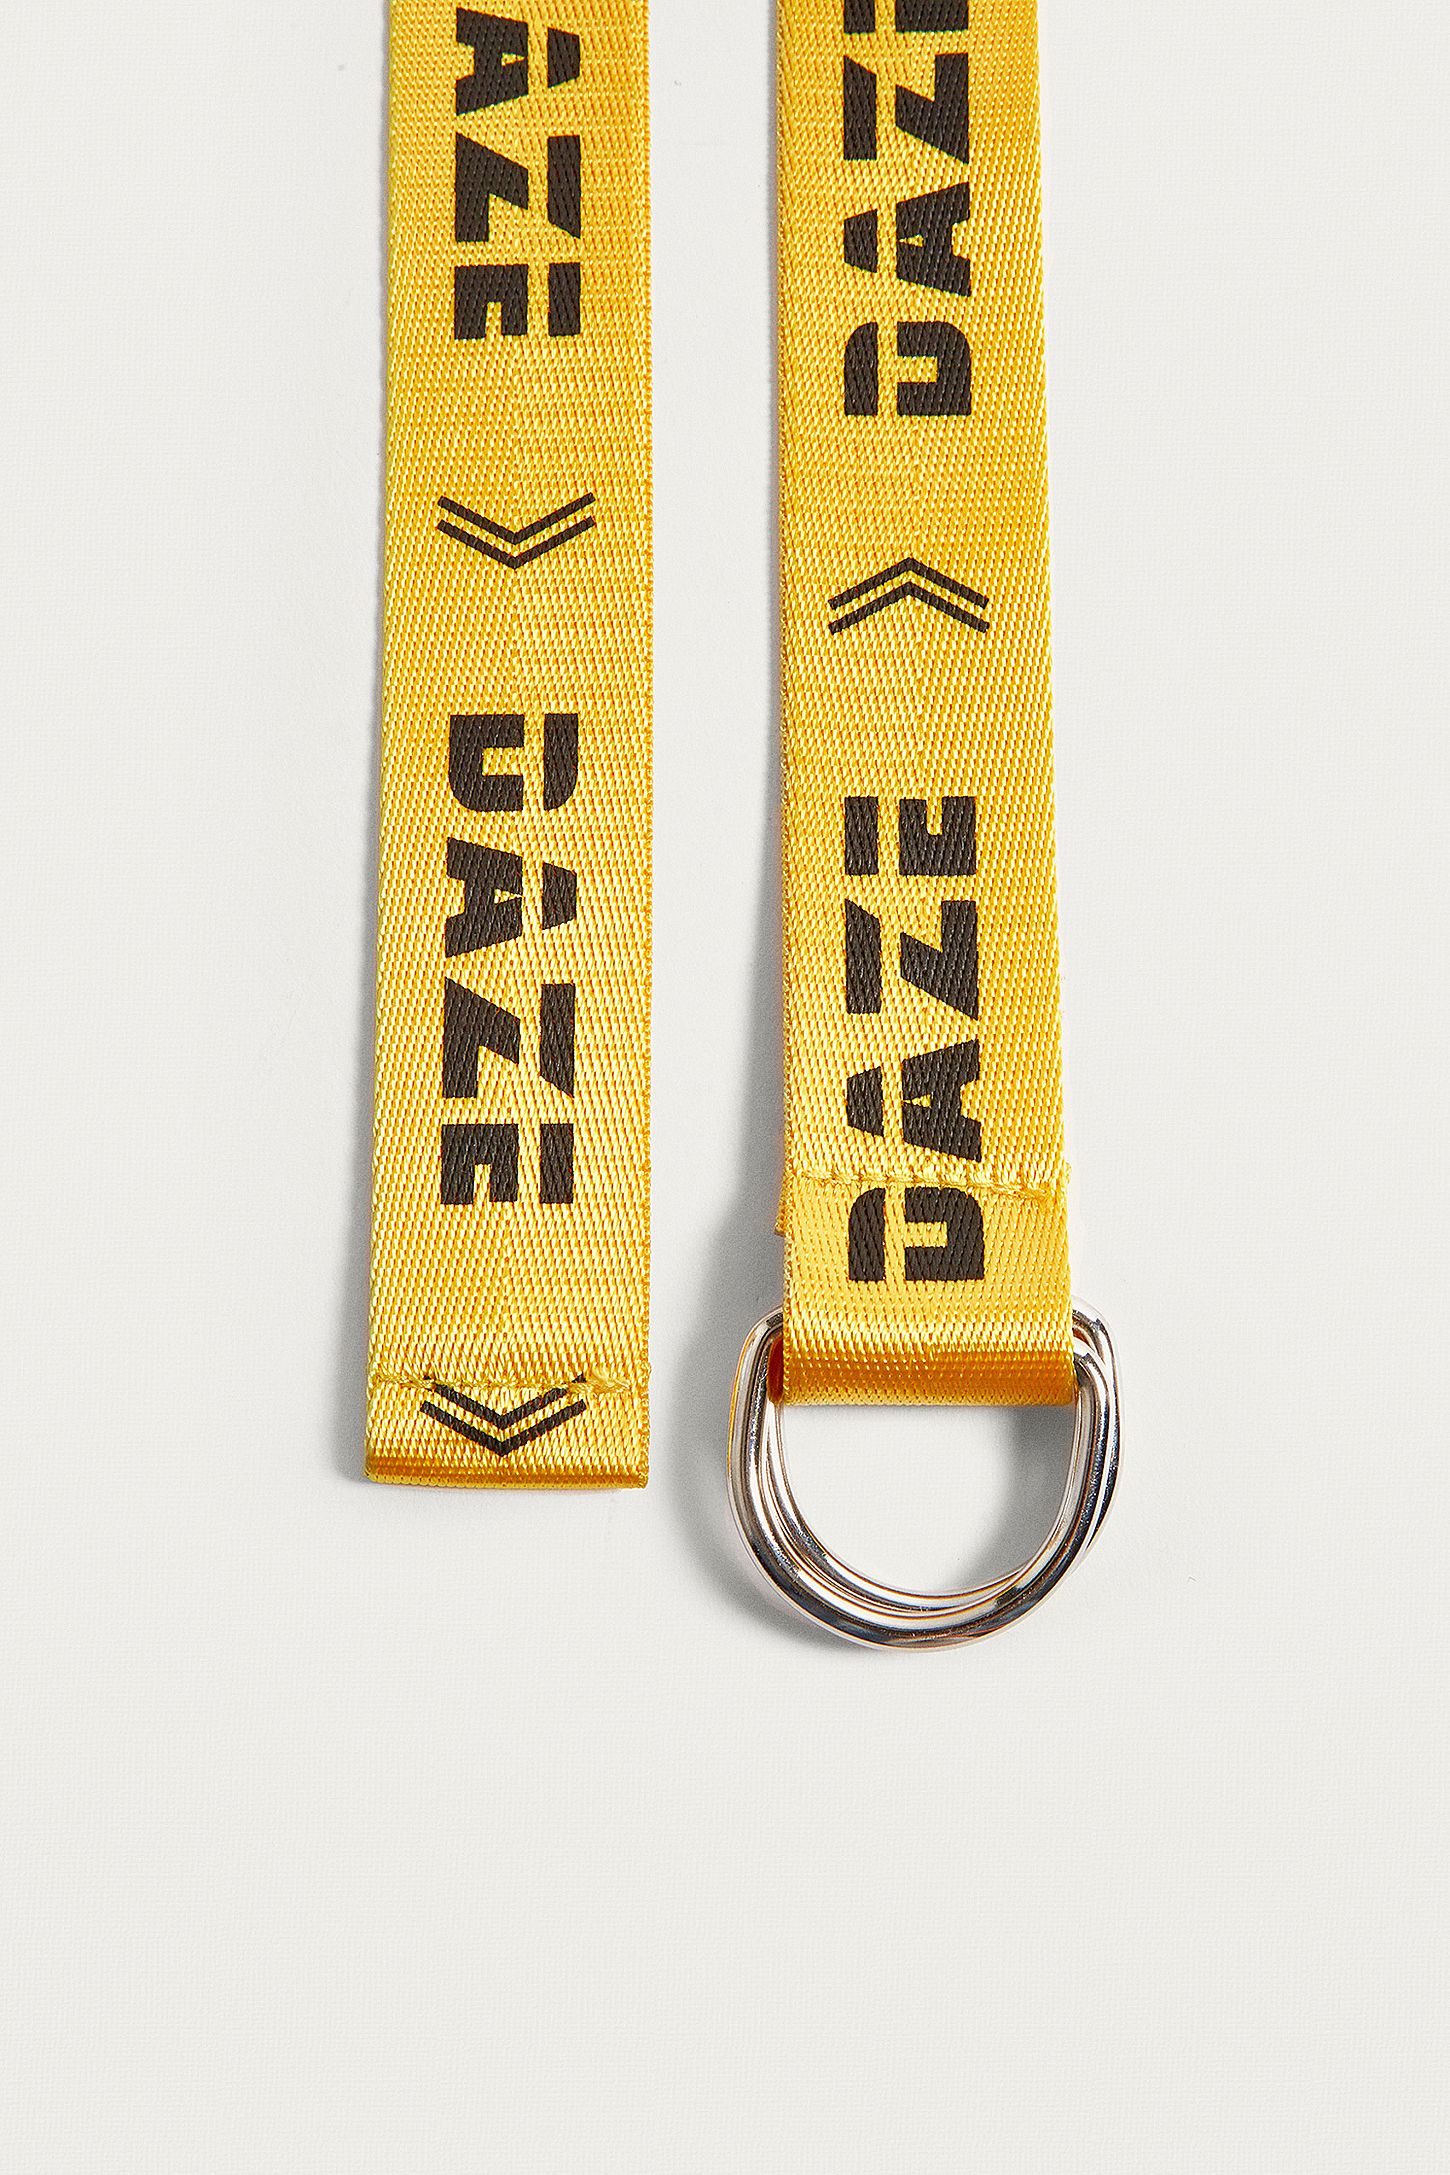 UO Daze Yellow D-Ring Belt | Urban Outfitters